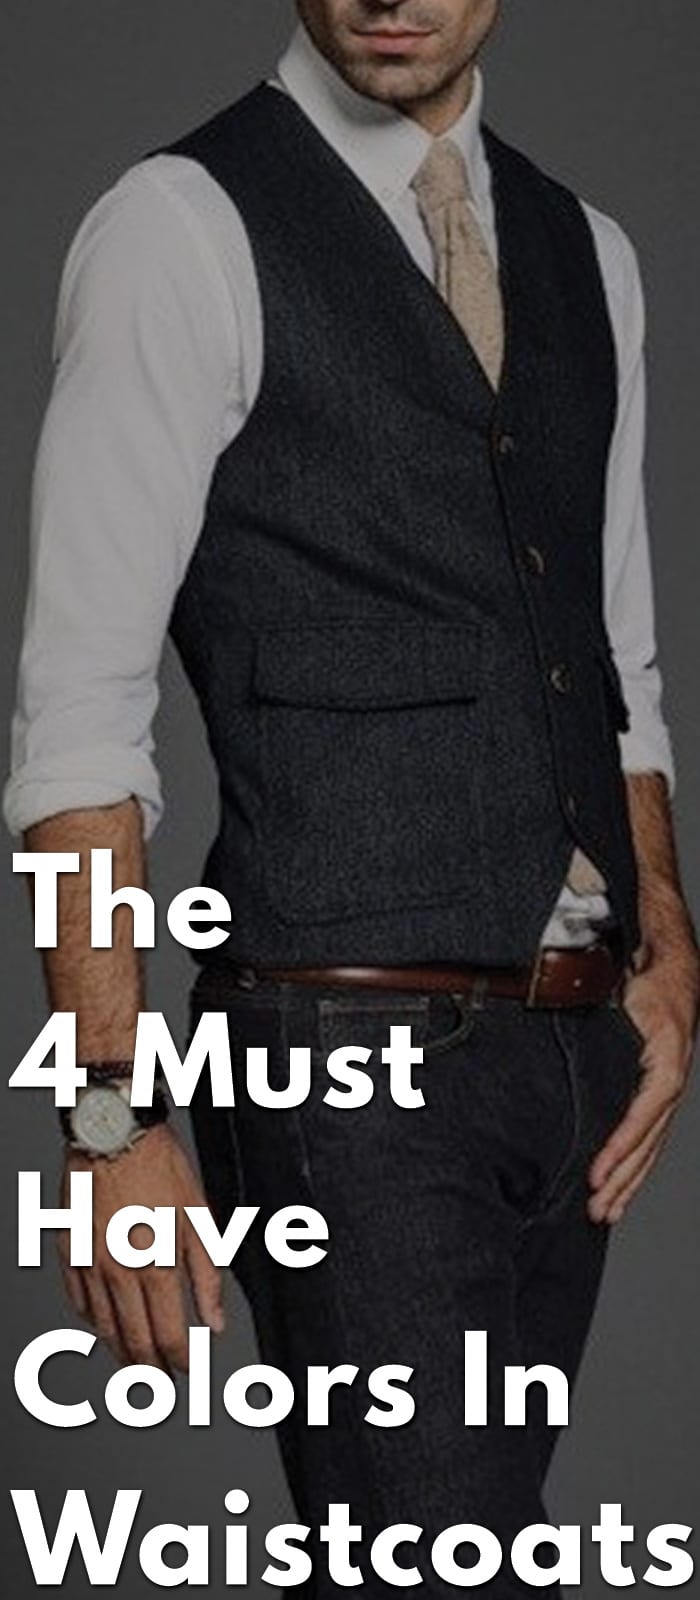 The-4-Must-Have-Colors-In-Waistcoats